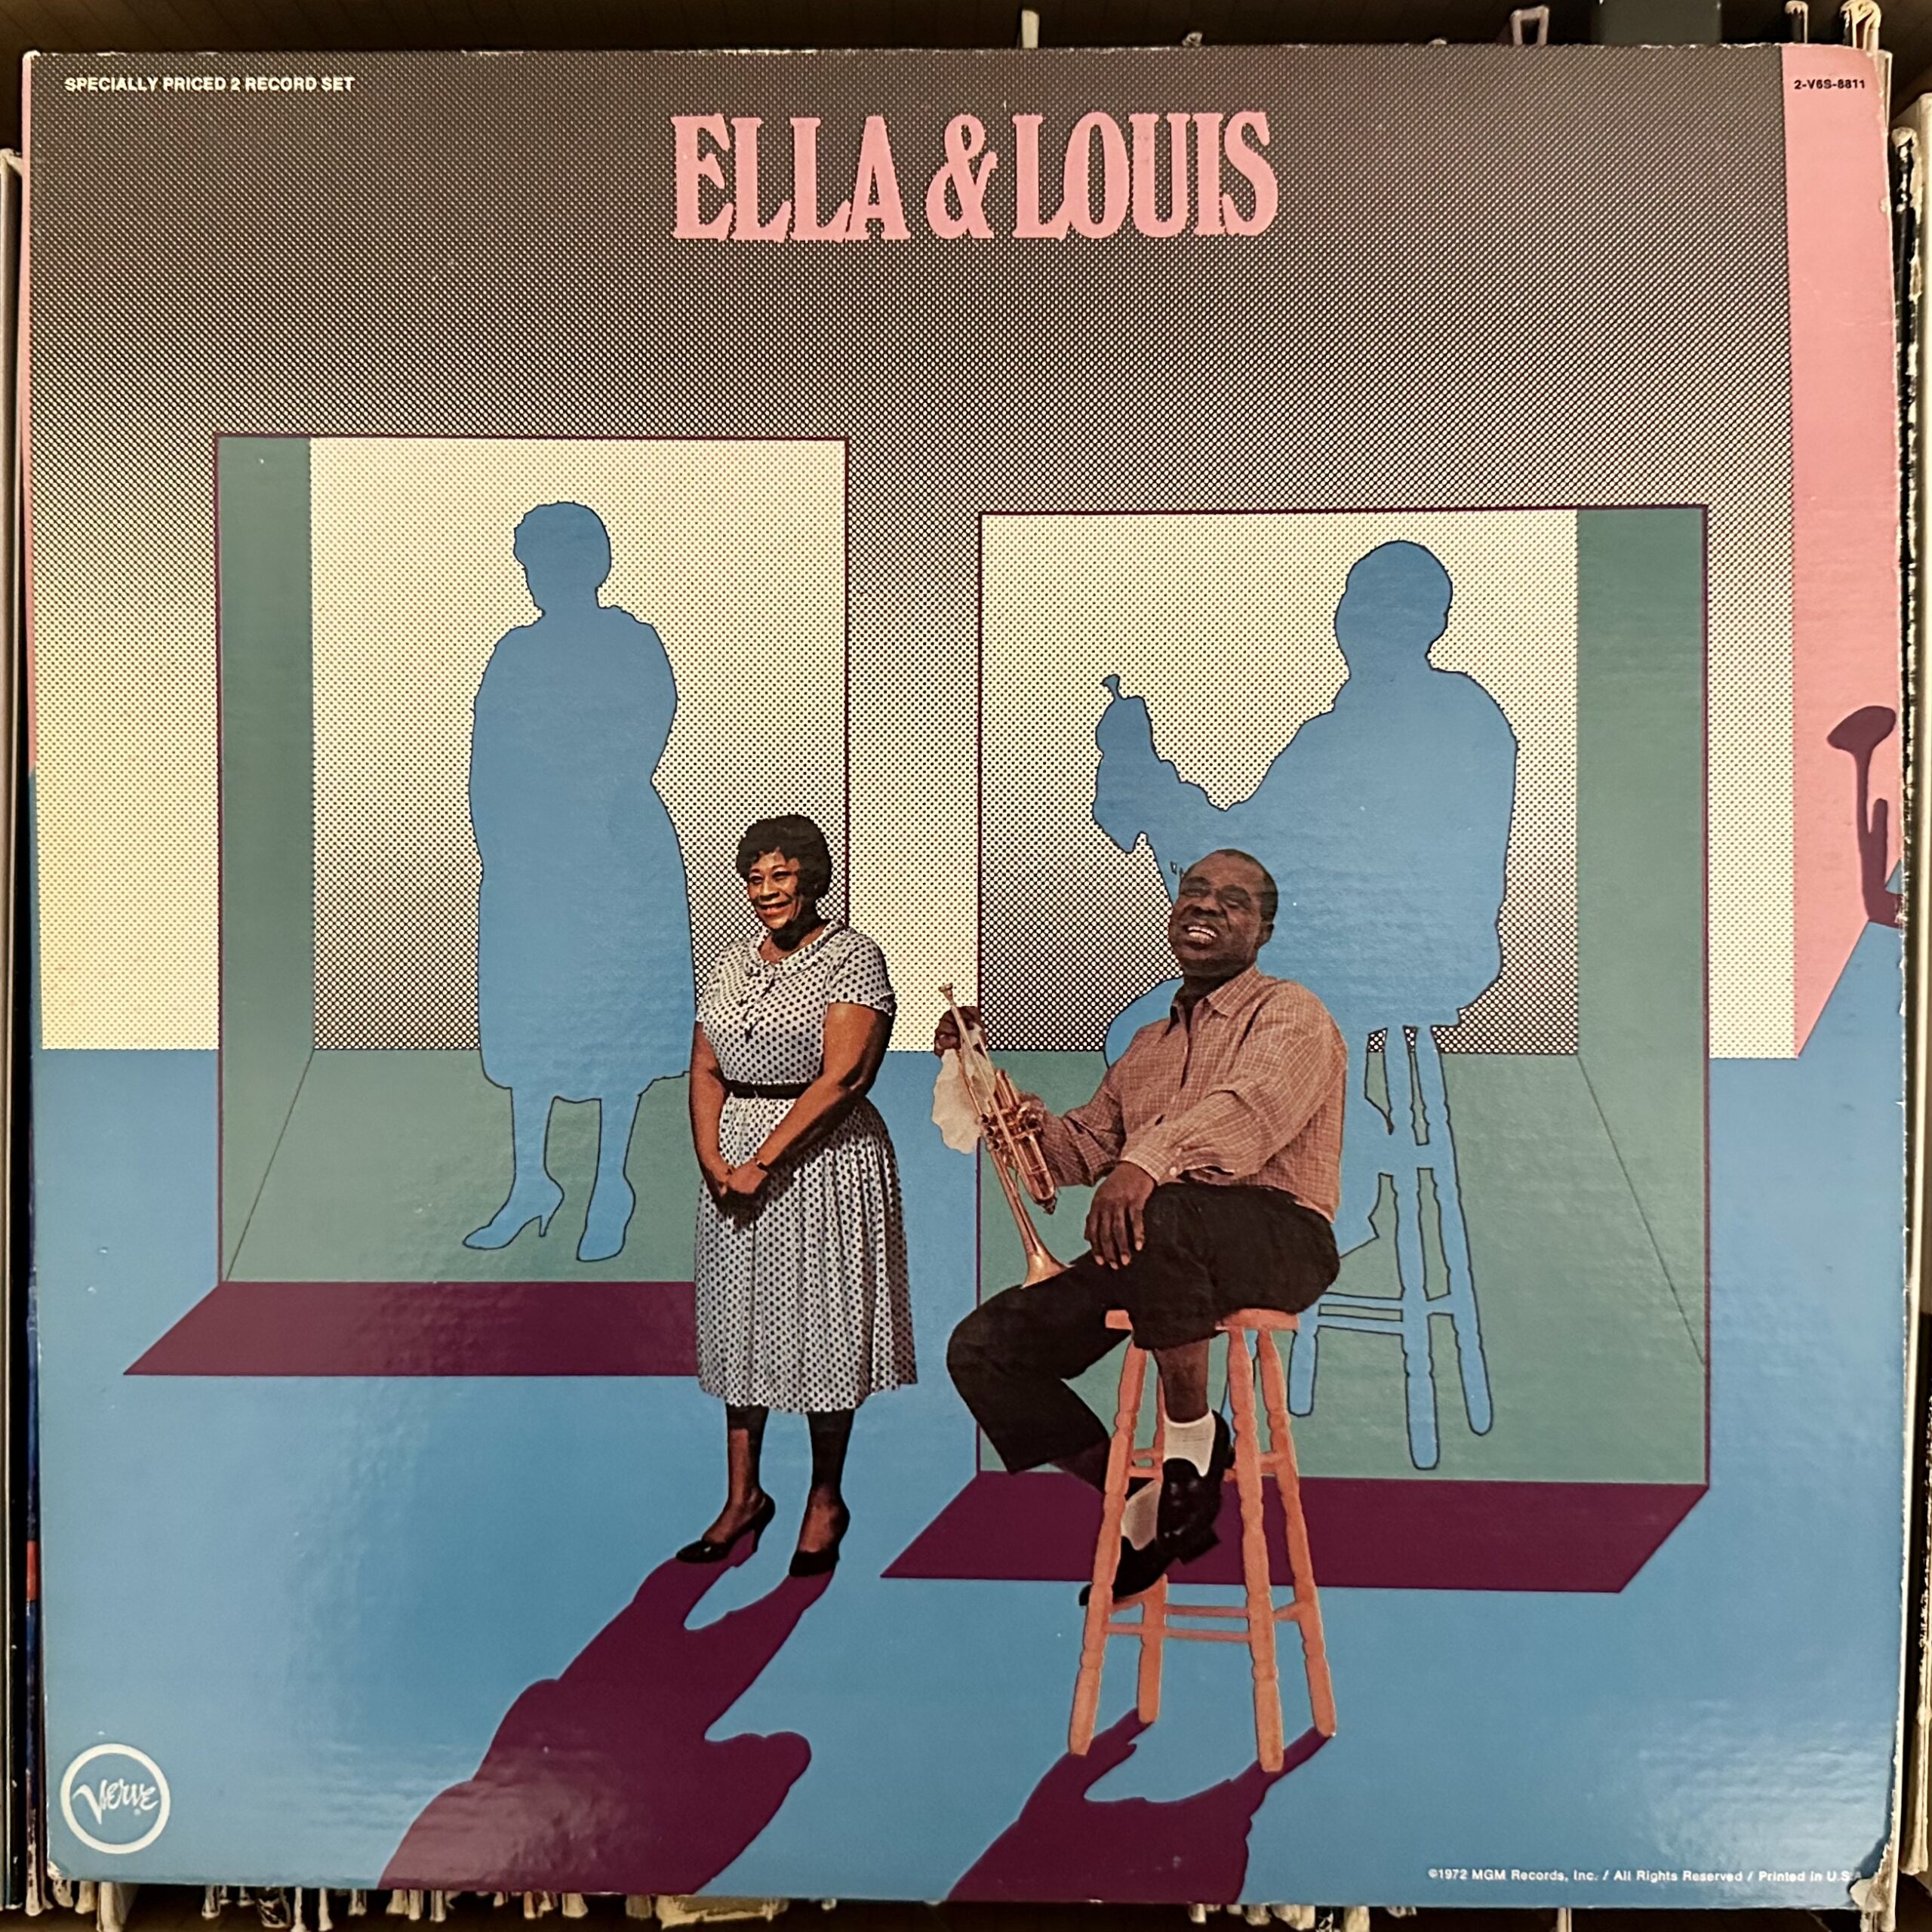 Ella & Louis by Ella Fitzgerald and Louis Armstrong